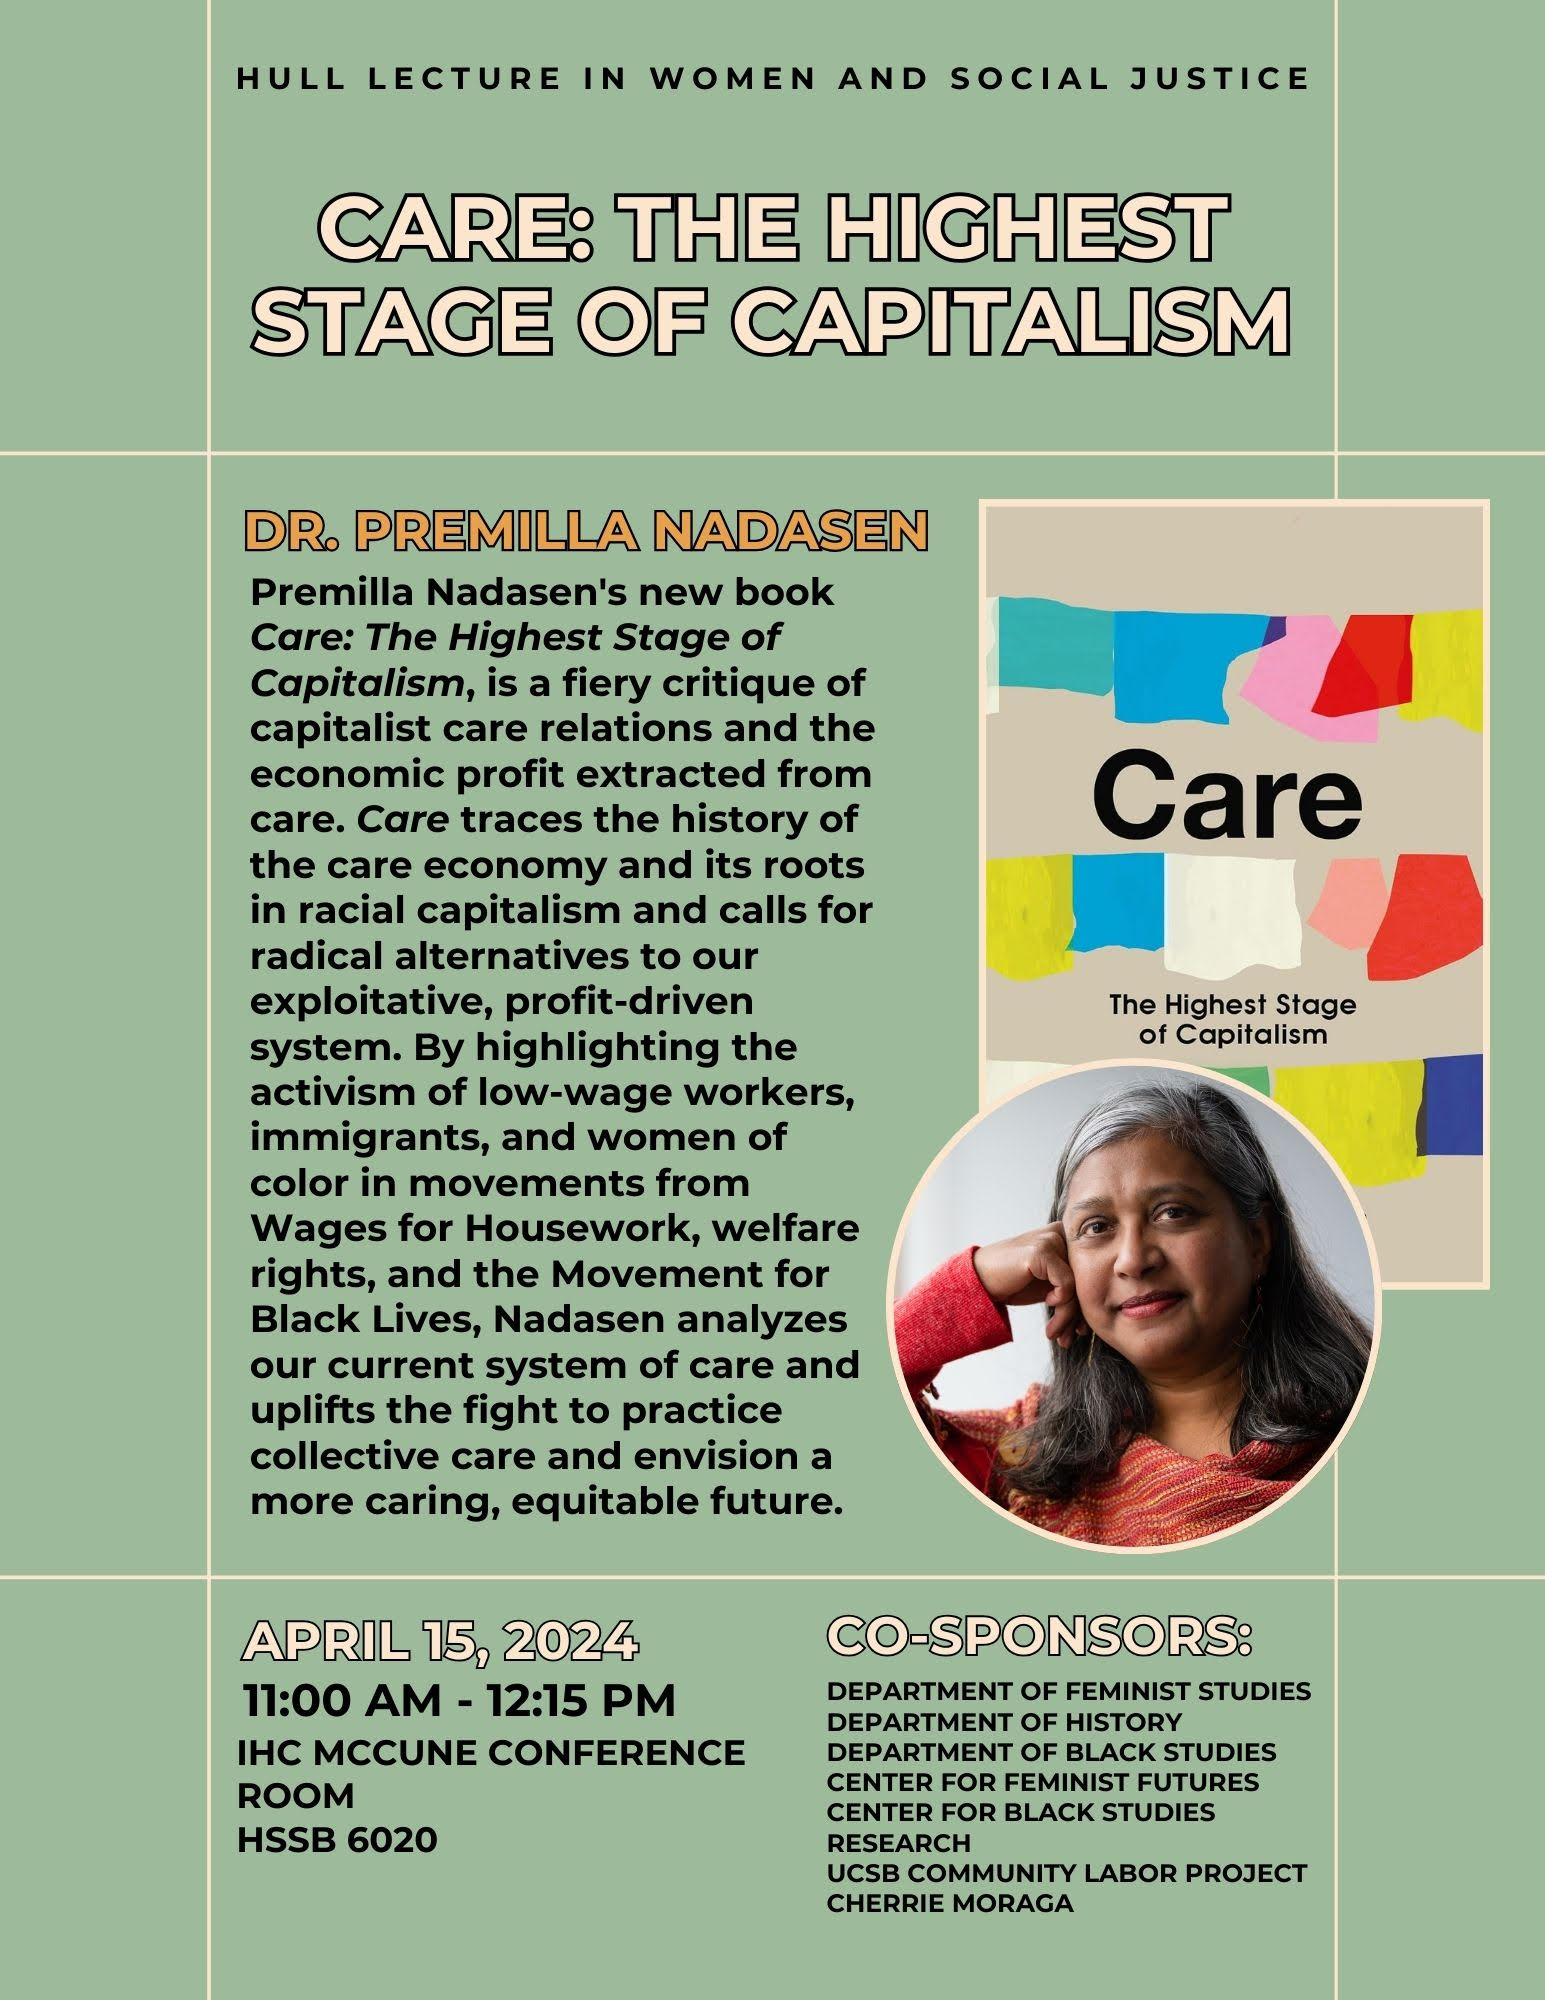 Dr. Premilla Nadasen | Hull Lecture in Women and Social Justice